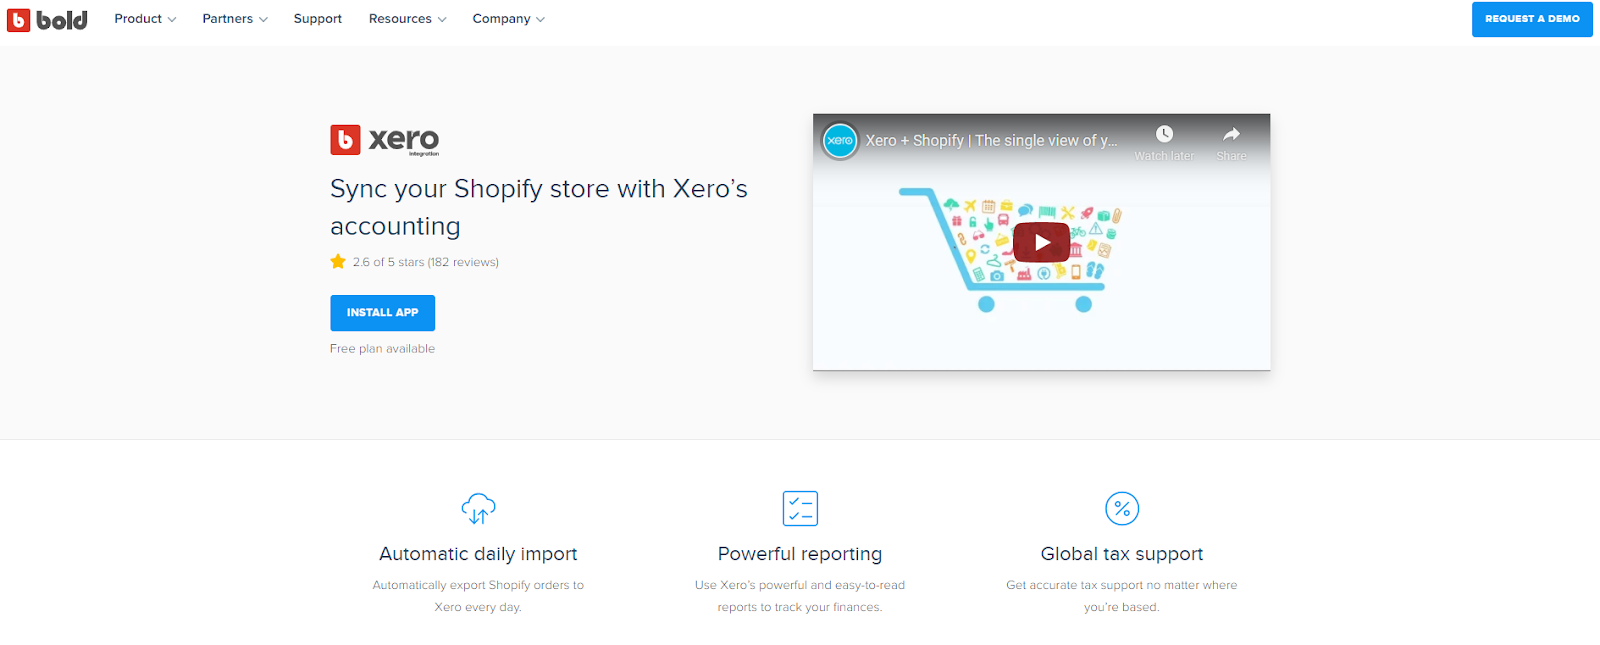 Bold and Xero landing page